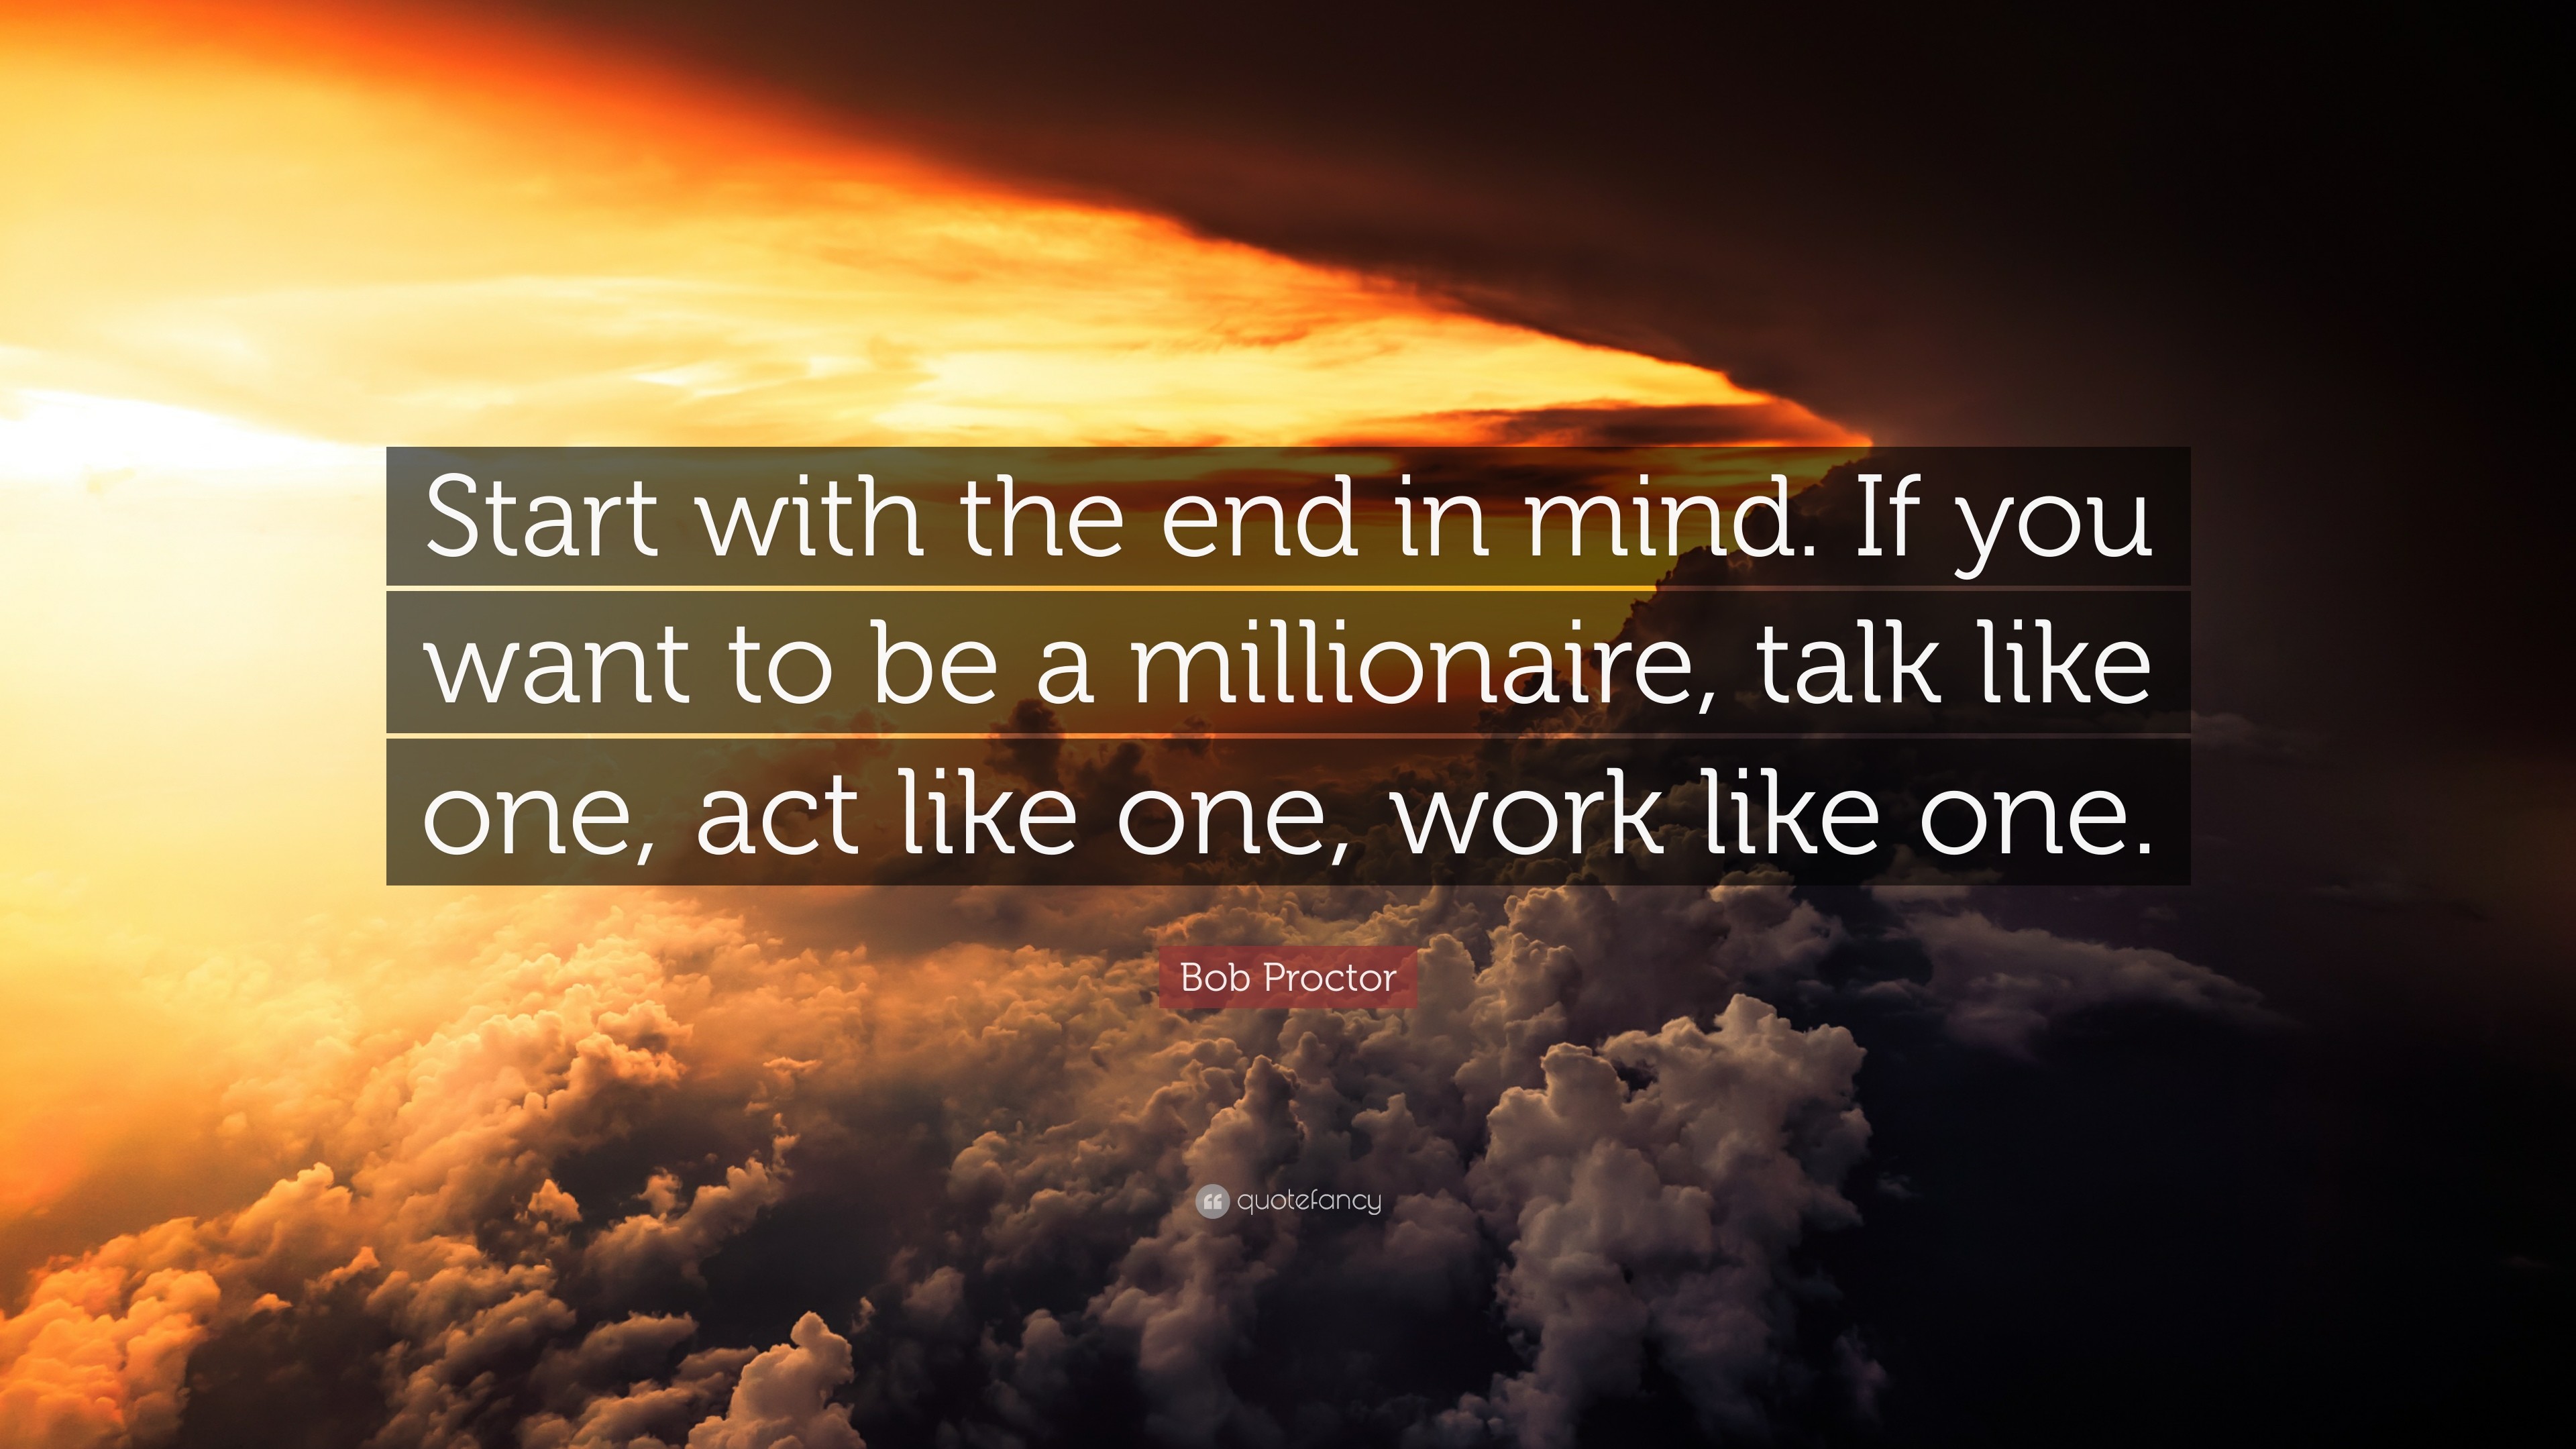 3840x2160 Bob Proctor Quote: “Start with the end in mind. If you want to